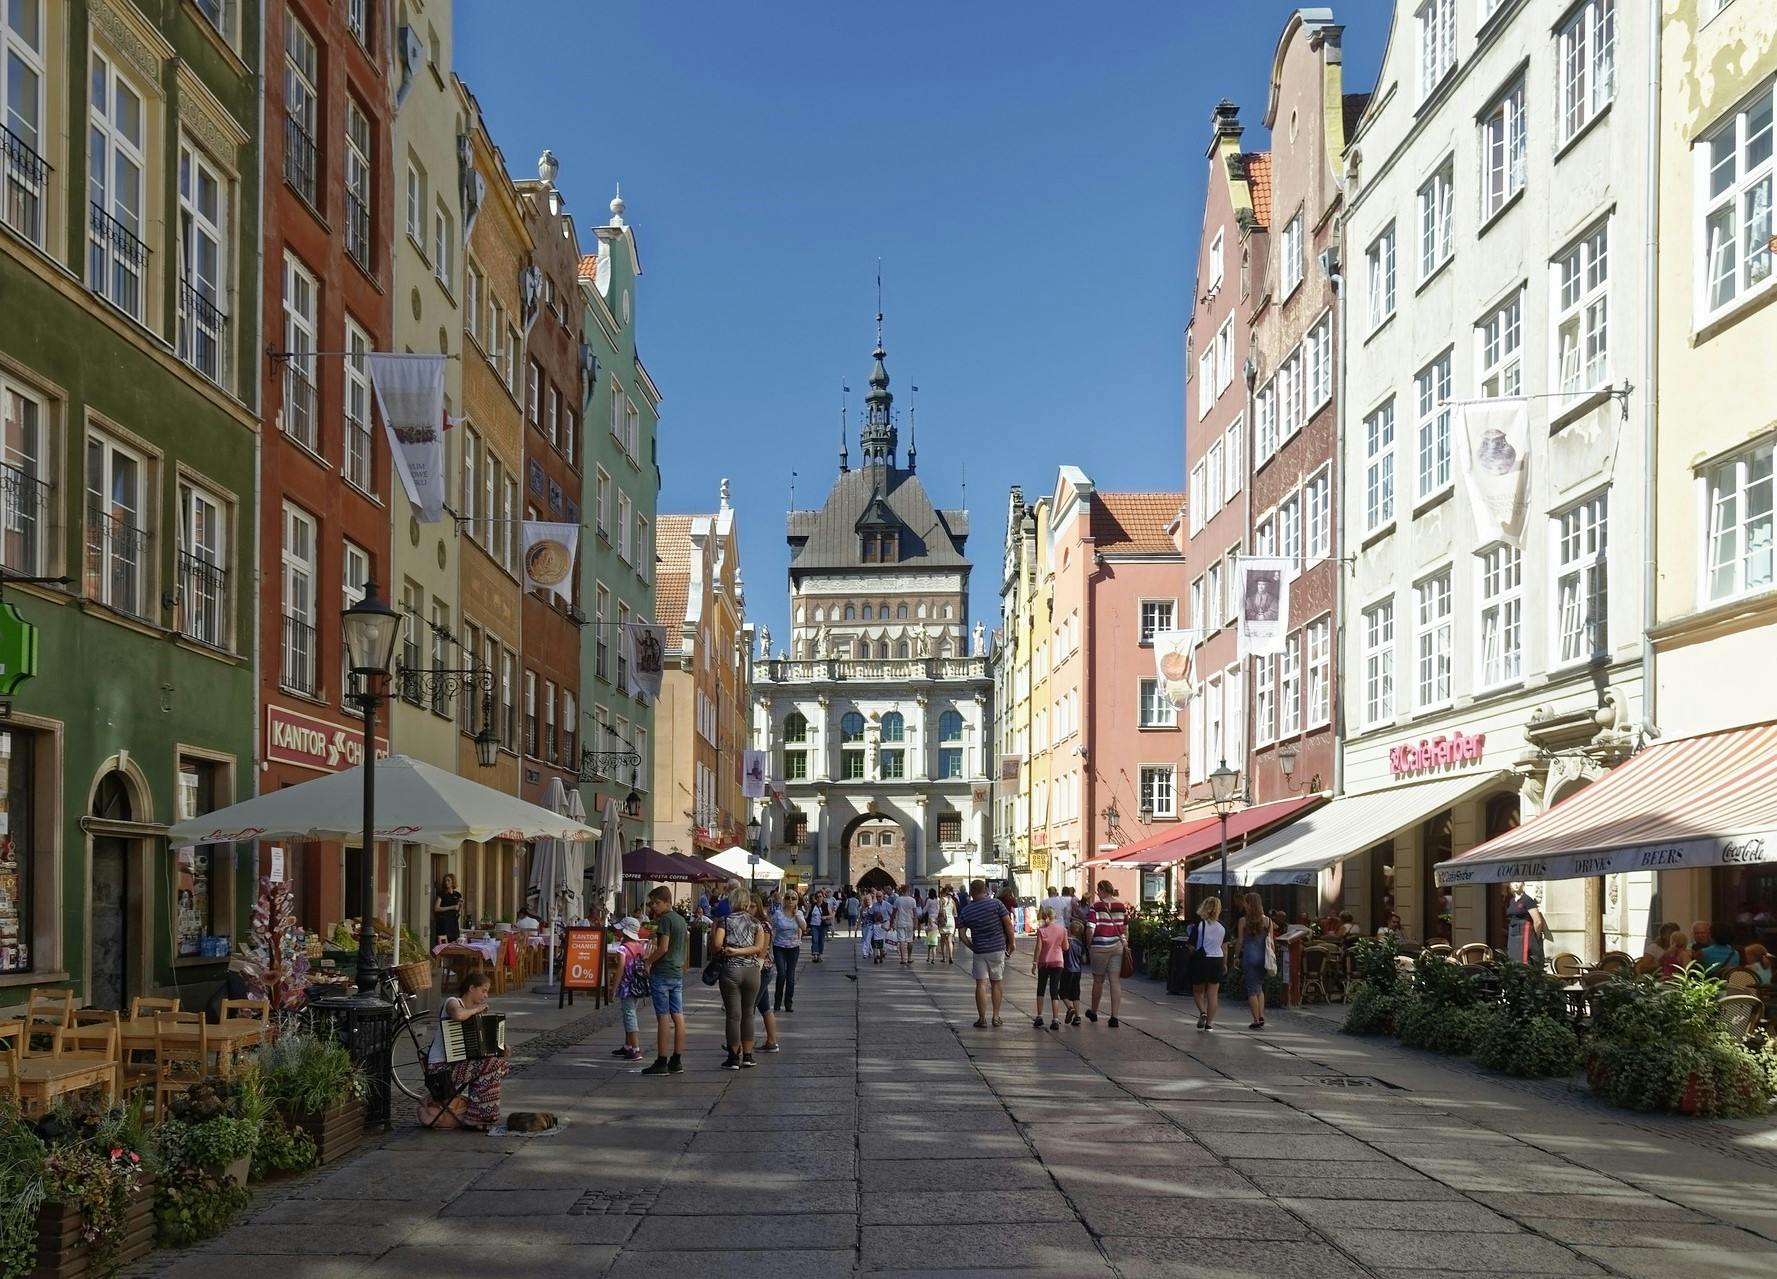 Self guided tour of Gdansk by audio guide Musement